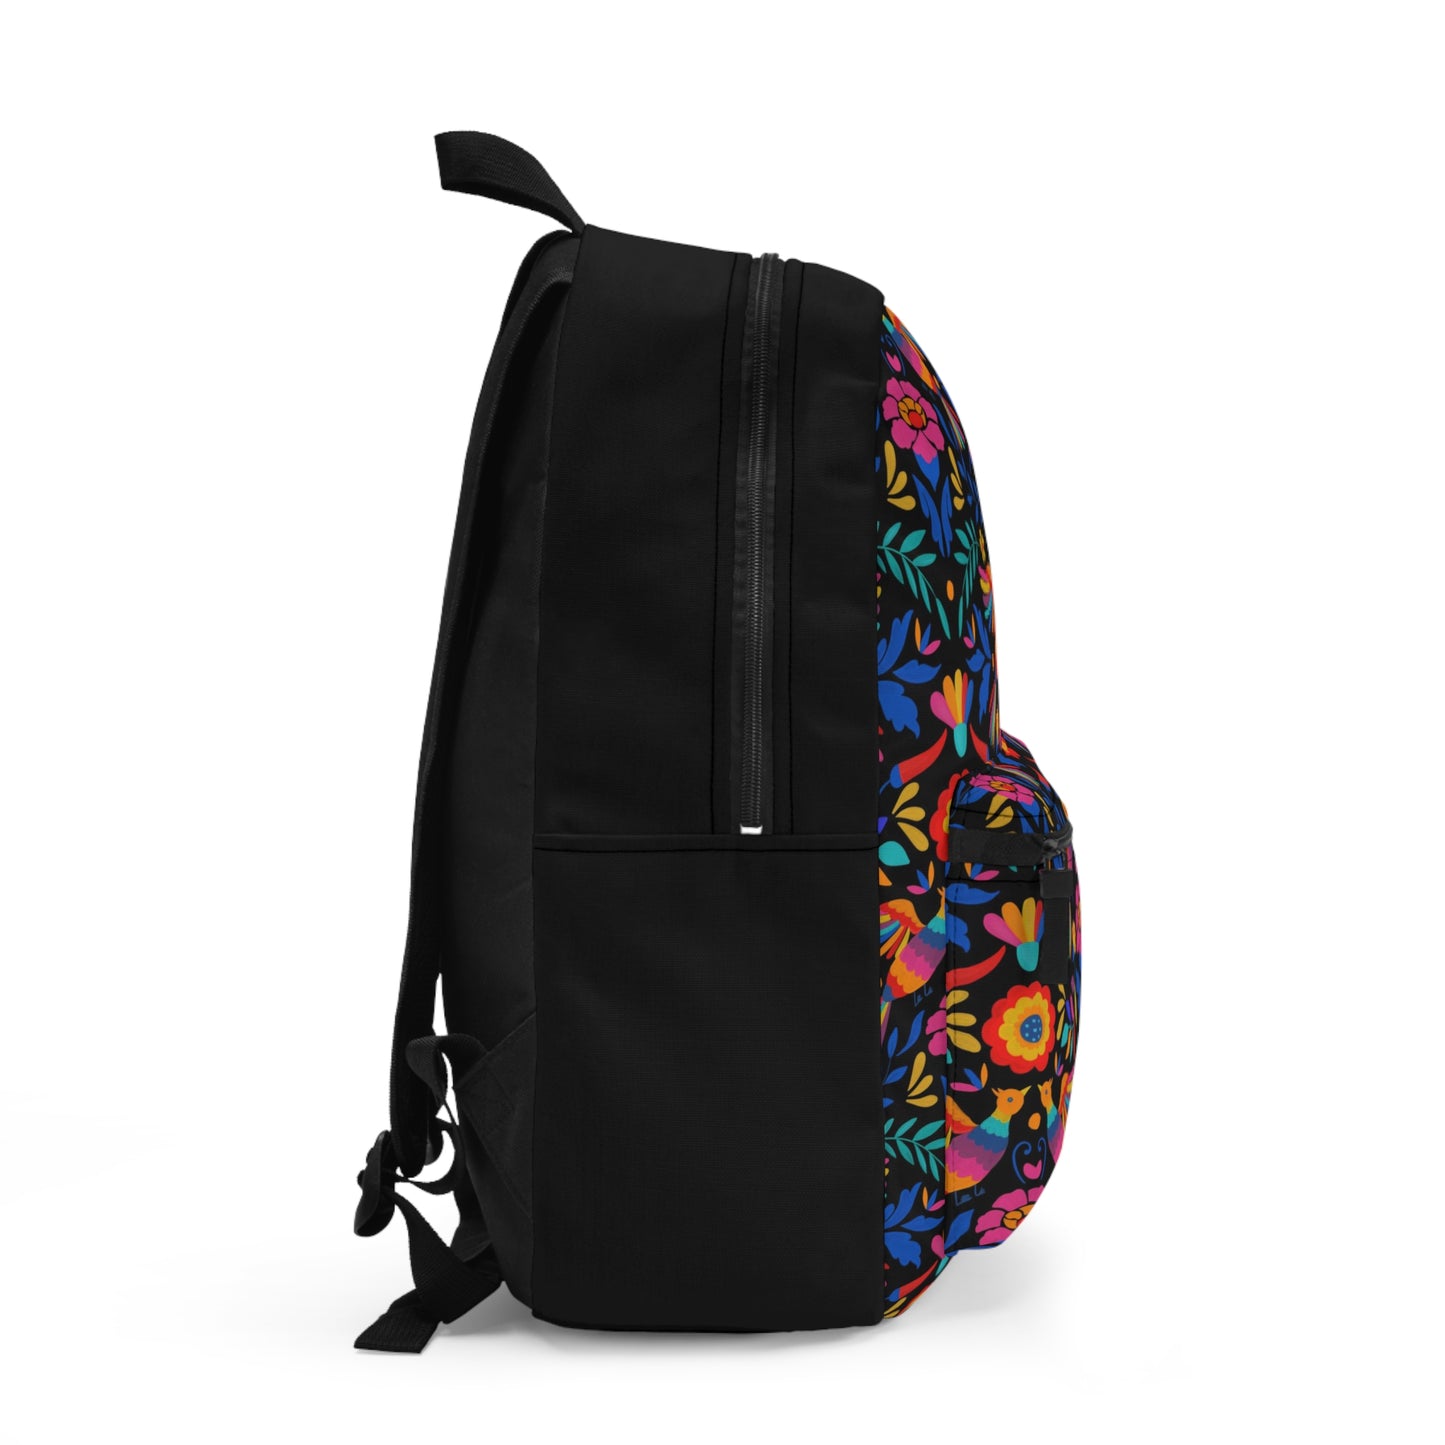 Mexican Backpack. Otomi Mexican Black and colorful back pack with Mexican art bag. Casual backpack for work, adventure or school.